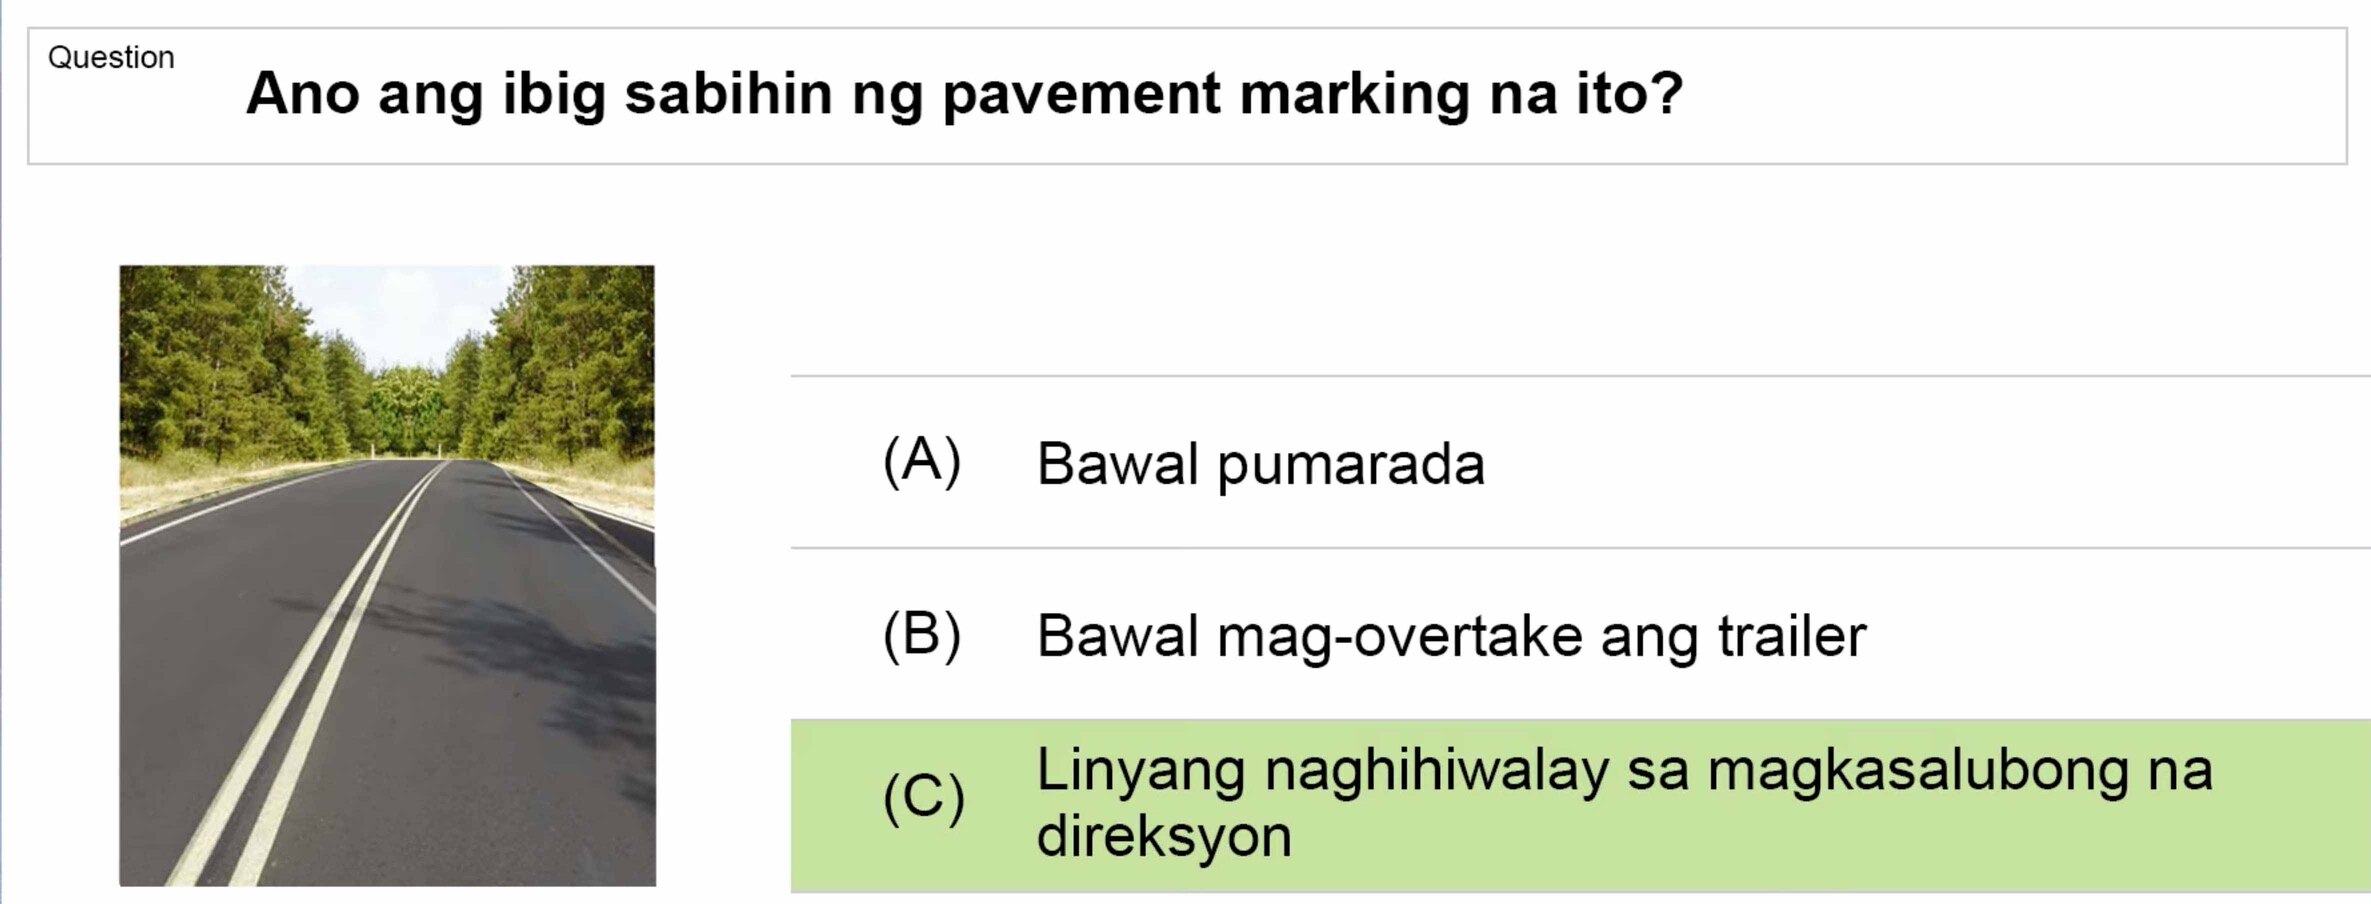 LTO Tagalog non professional exam reviewer motorcycle 1 (29)